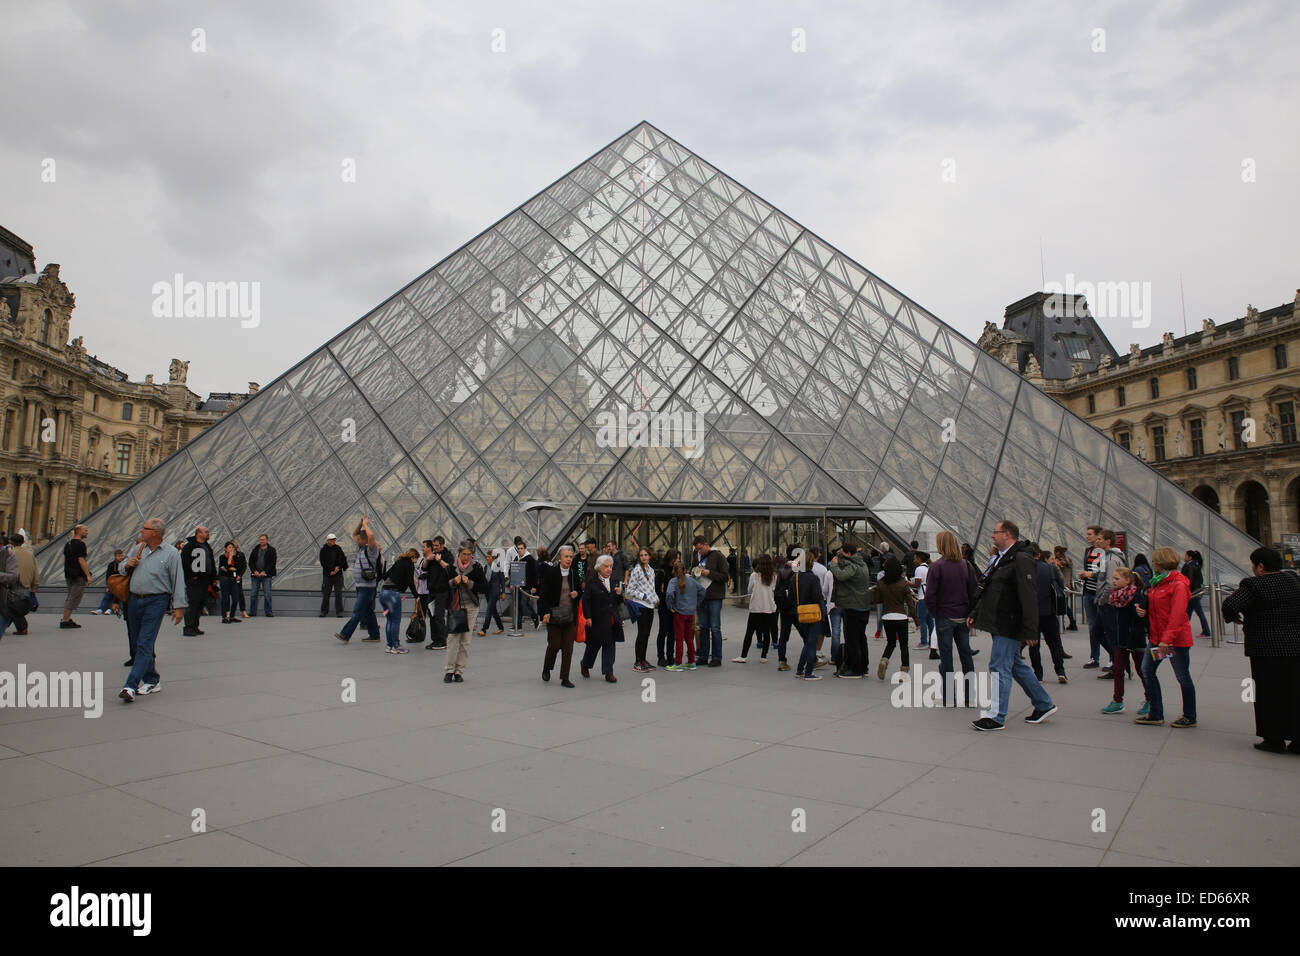 People Inside the Louvre Museum (Musee Du Louvre) Editorial Stock Image -  Image of city, museum: 39941264